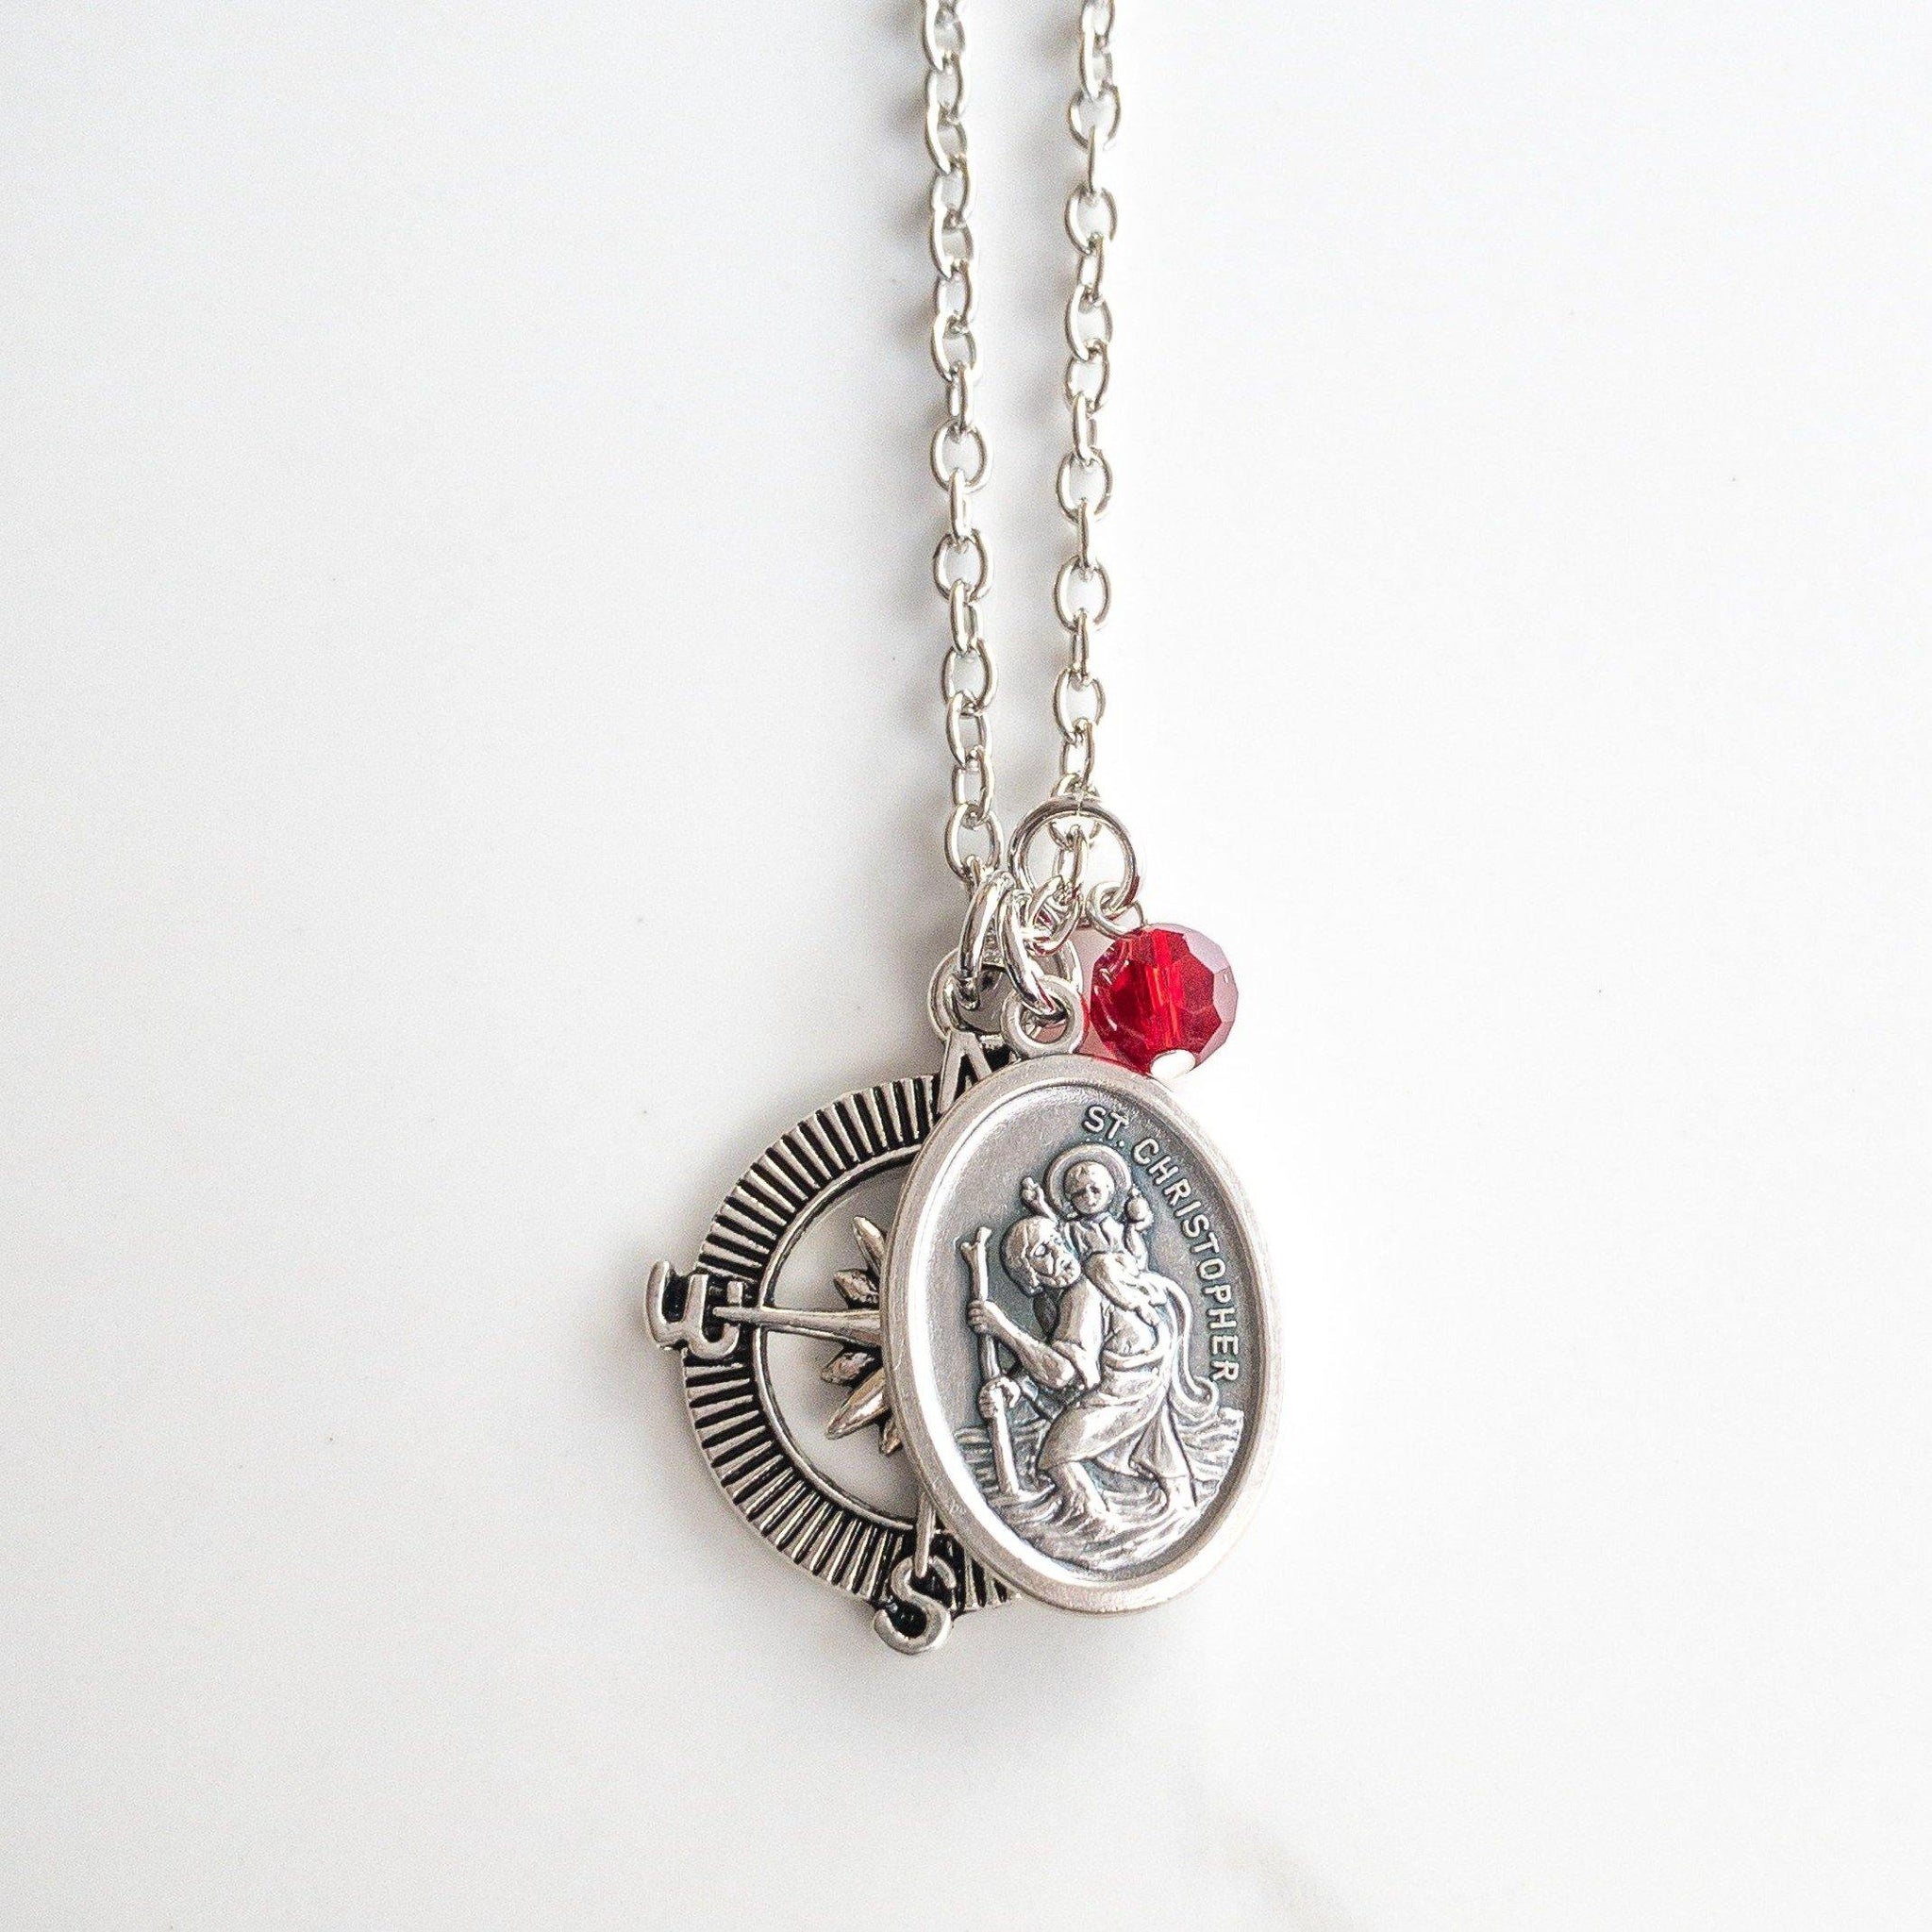 St Christopher Compass Necklace - Sagely Sparrow